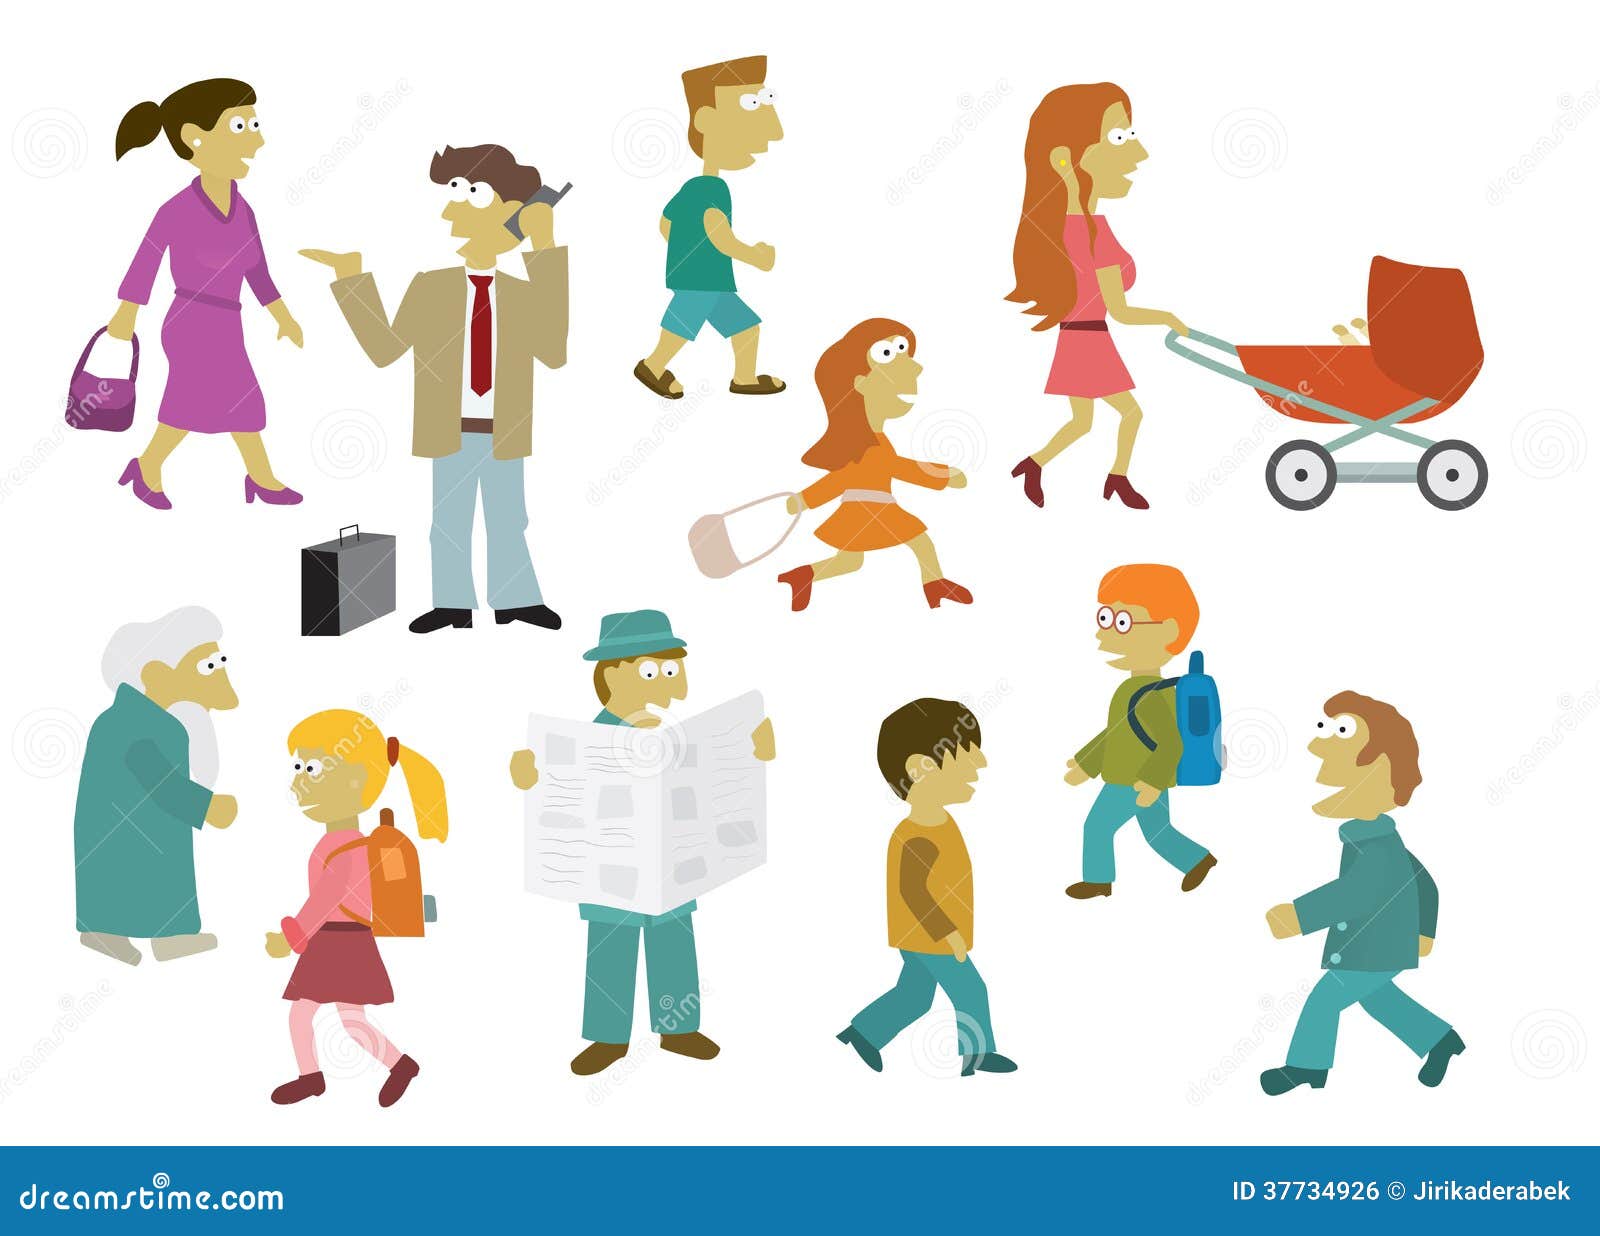 People group stock vector. Illustration of adolescent - 37734926